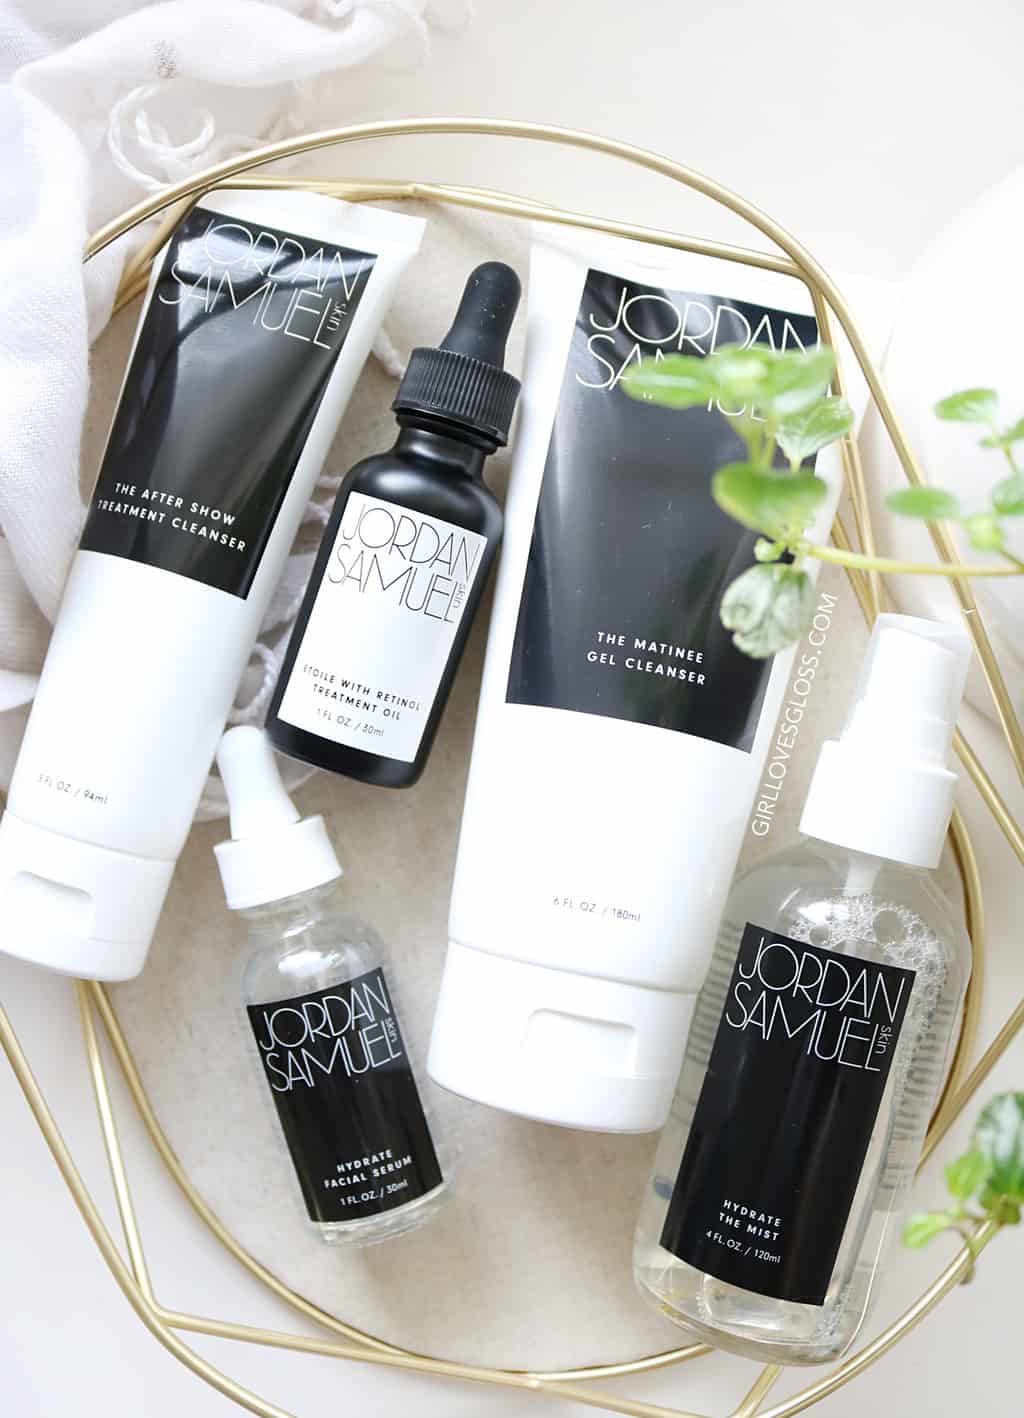 The Skincare Line You Should Know About | Jordan Samuel Skin